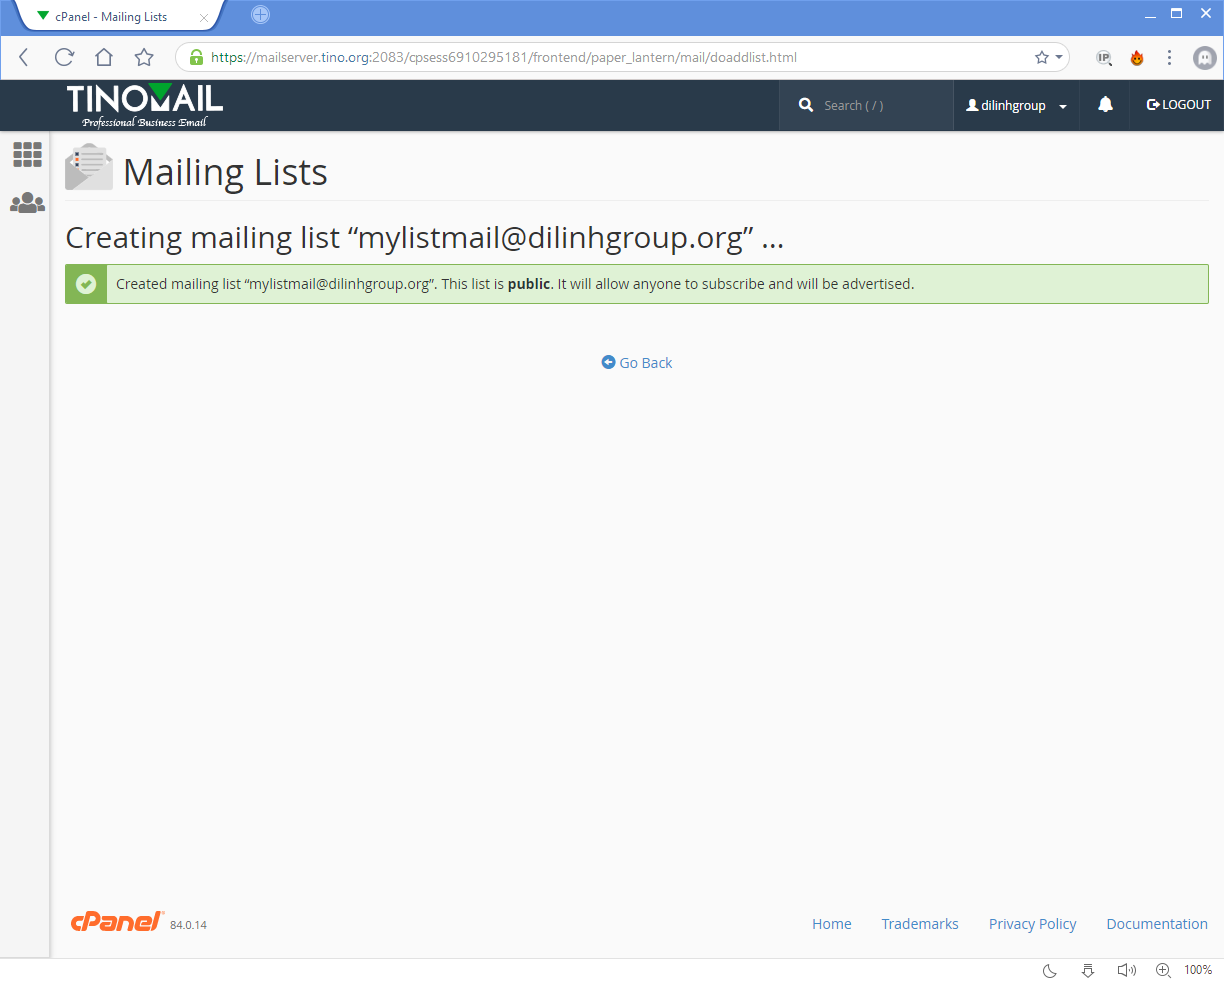 [cPanel] - Mailing Lists 3